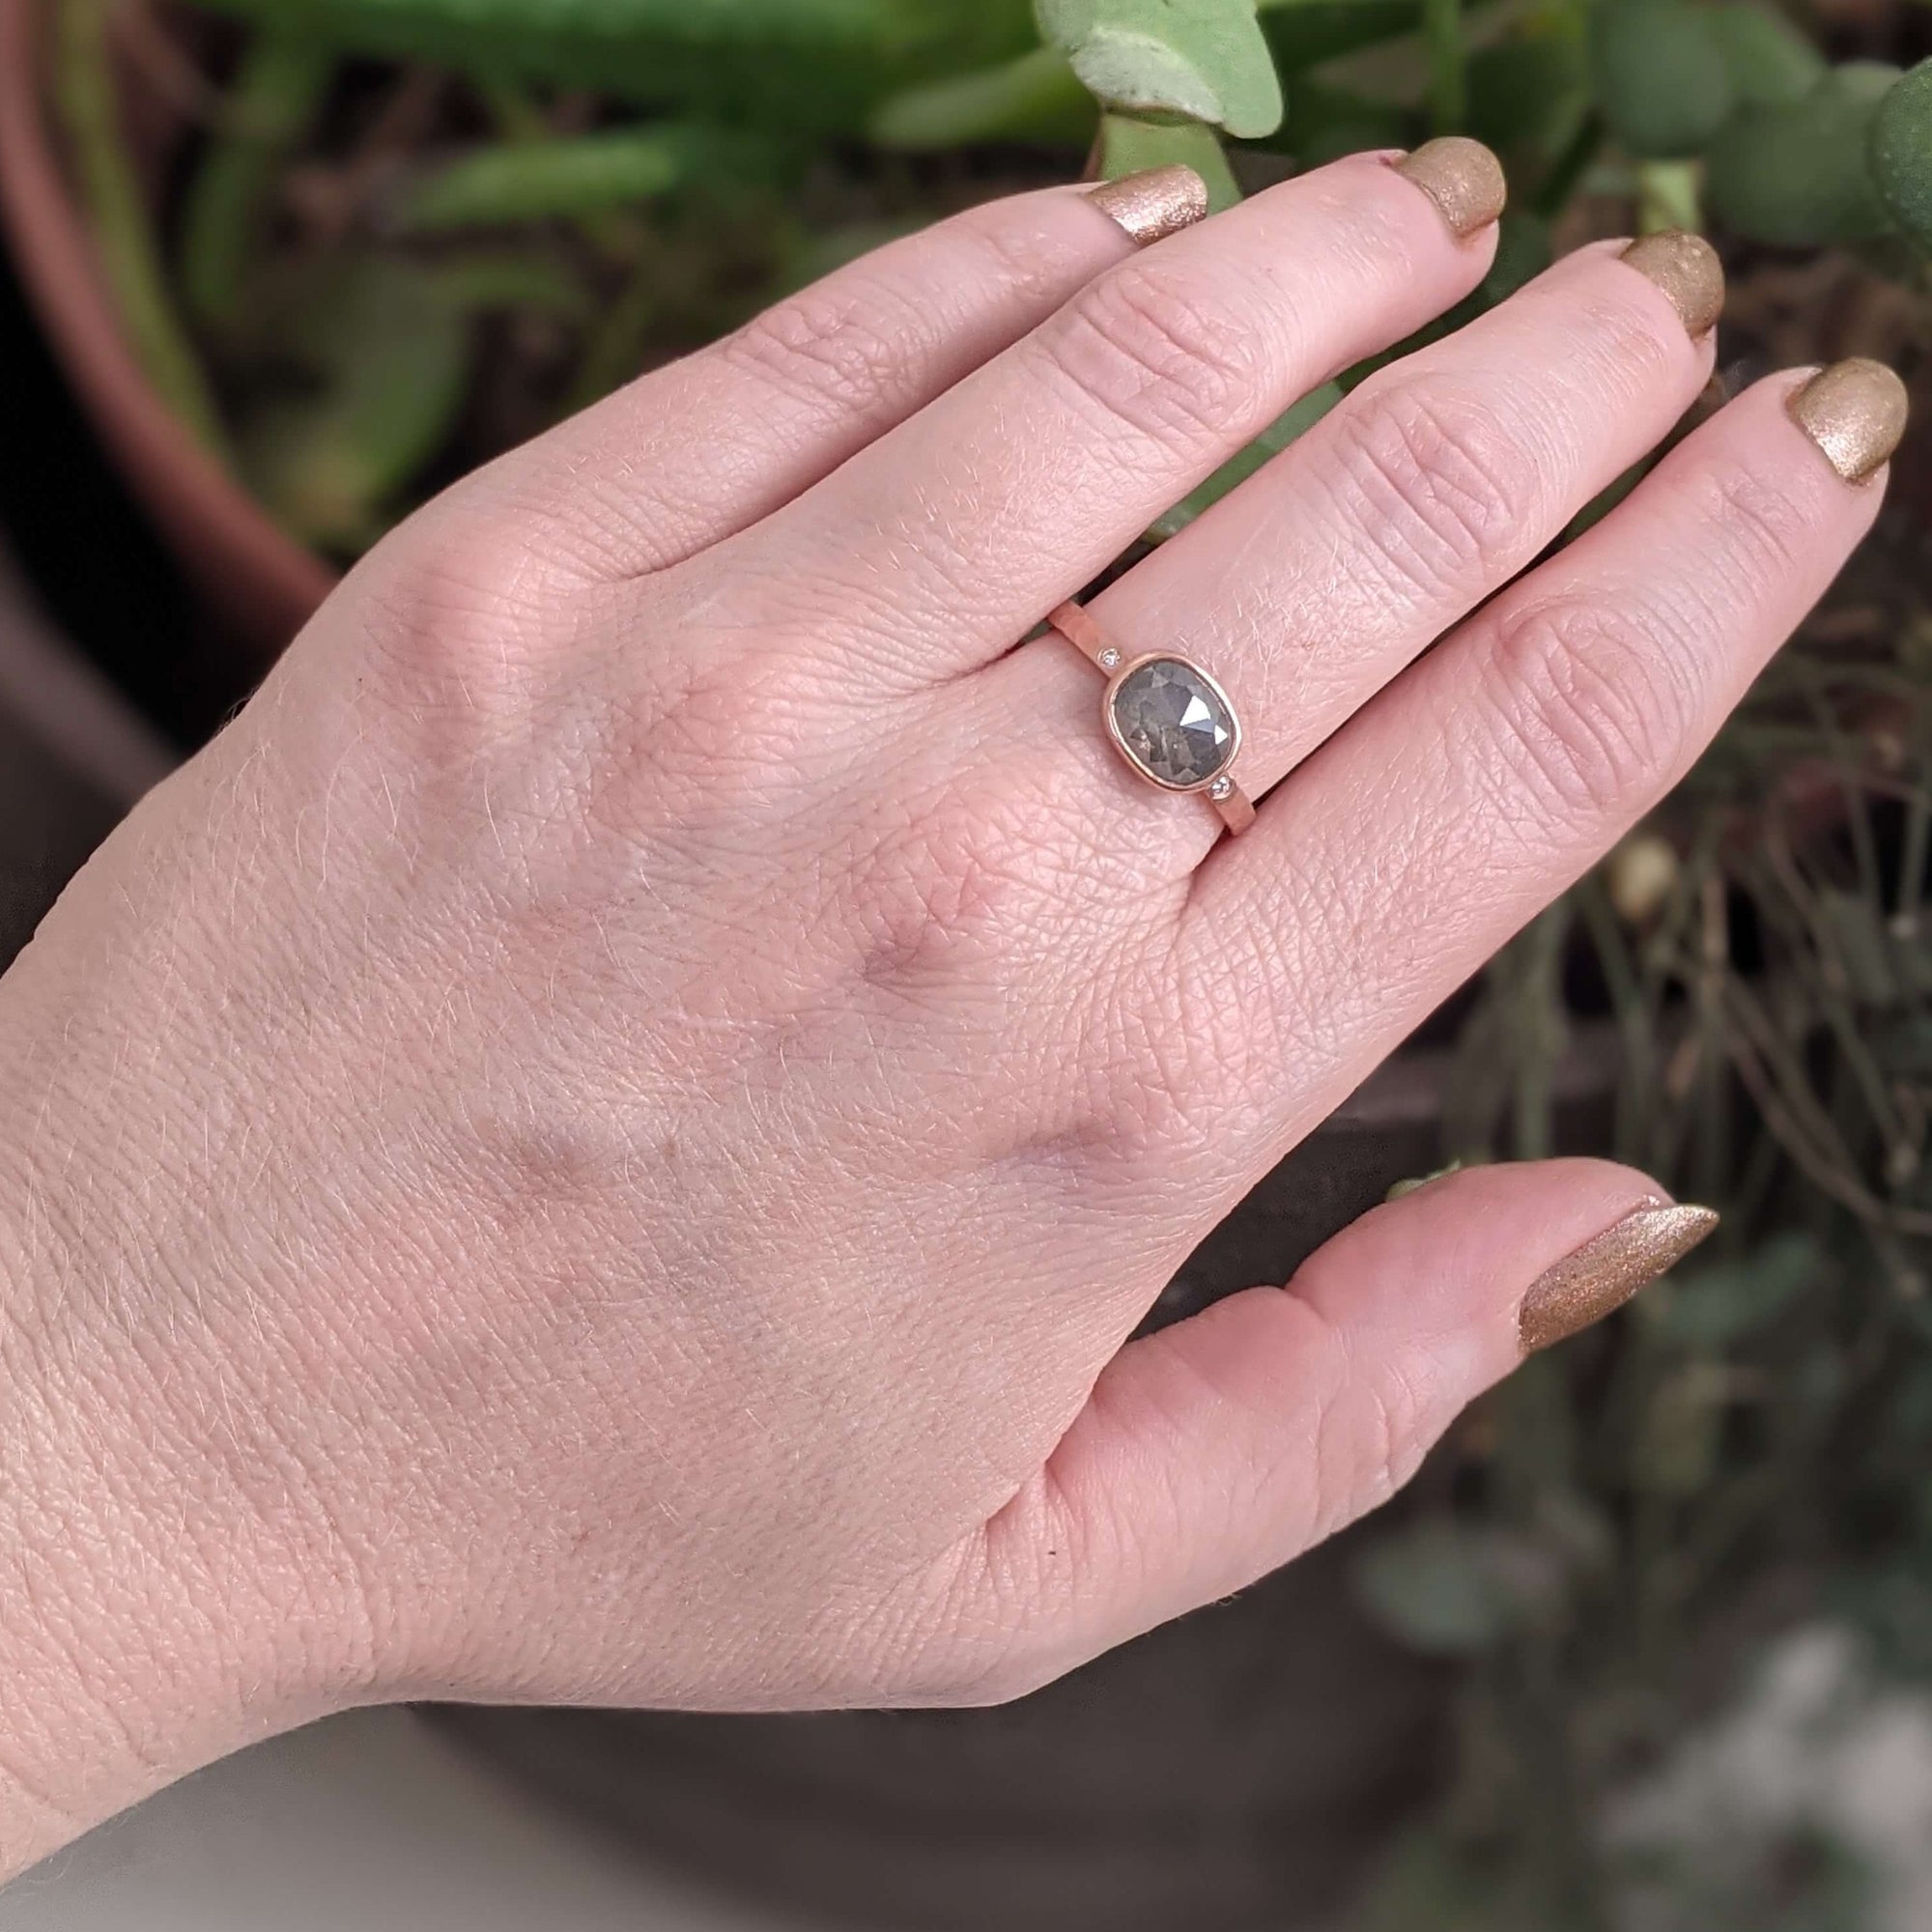 Cushion cut gray diamond in hammered rose gold with flush set diamond accents. Handmade by EC Design Jewelry in Minneapolis, MN using recycled metal and conflict-free stones.